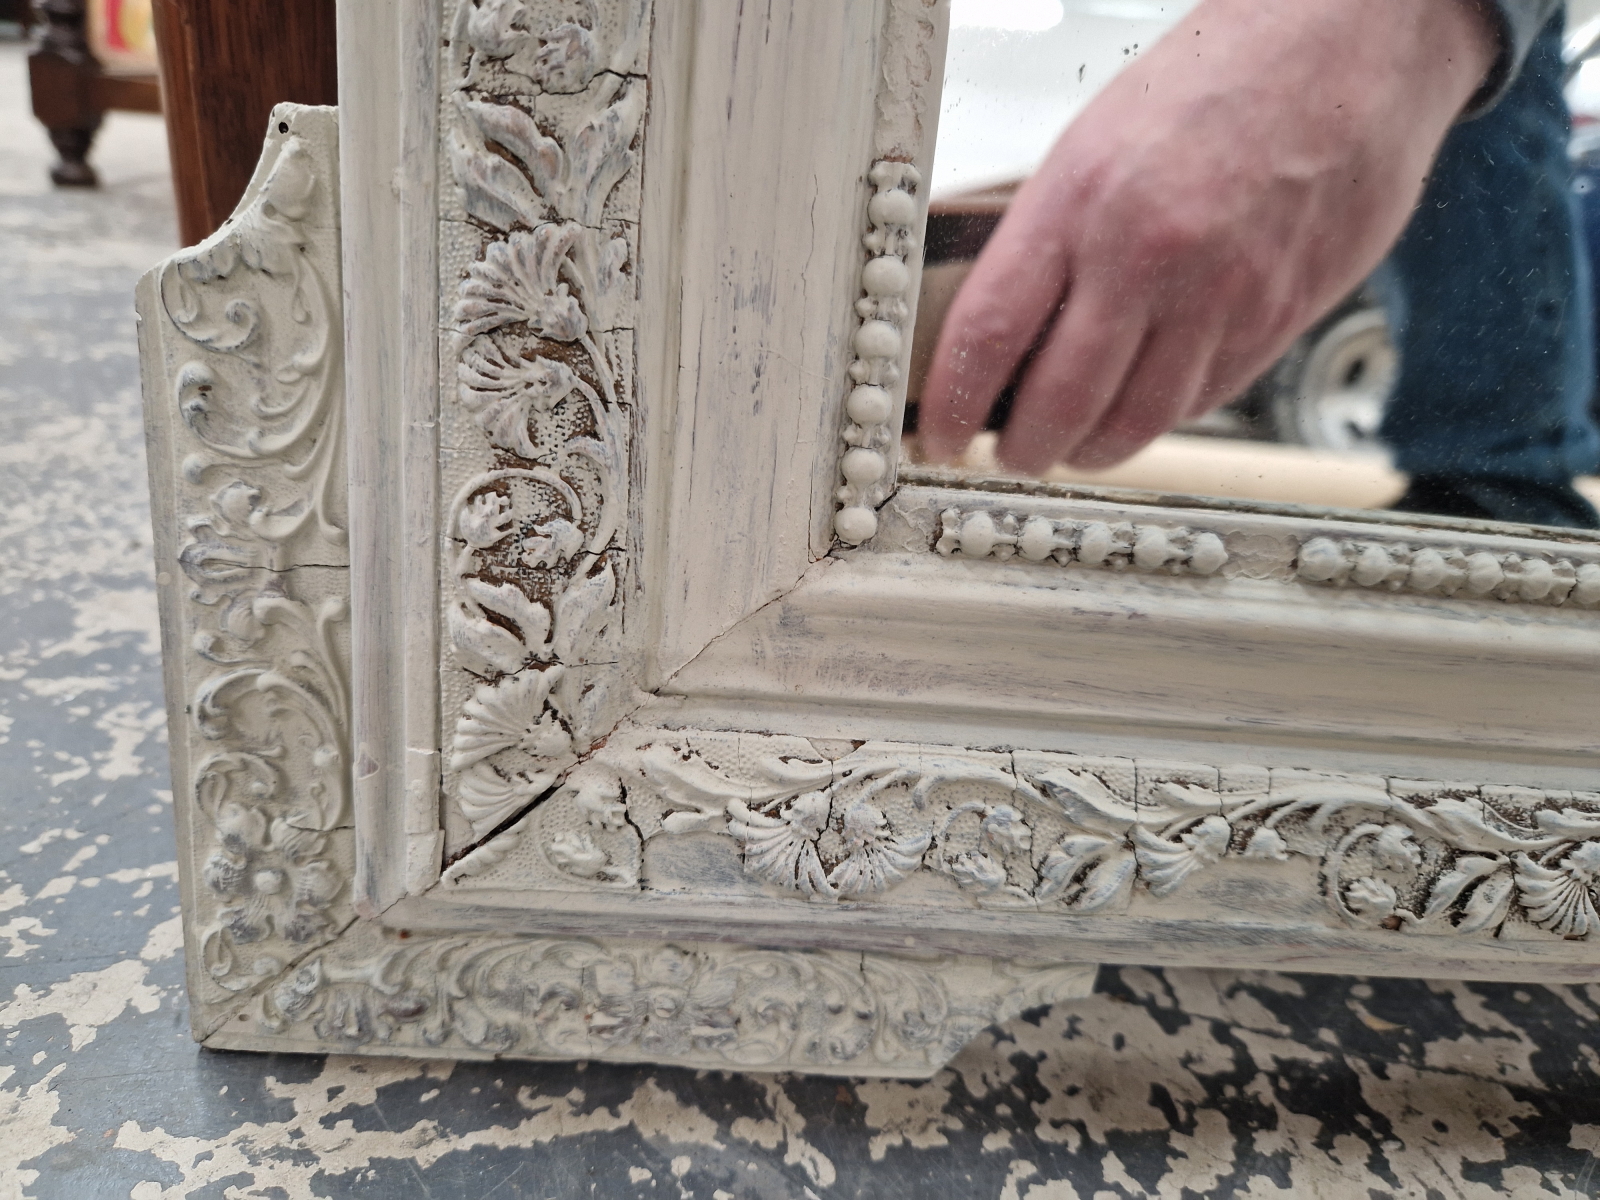 AN ANTIQUE WALL MIRROR WITH CARVED WOOD AND GESSO FRAME. - Image 6 of 7